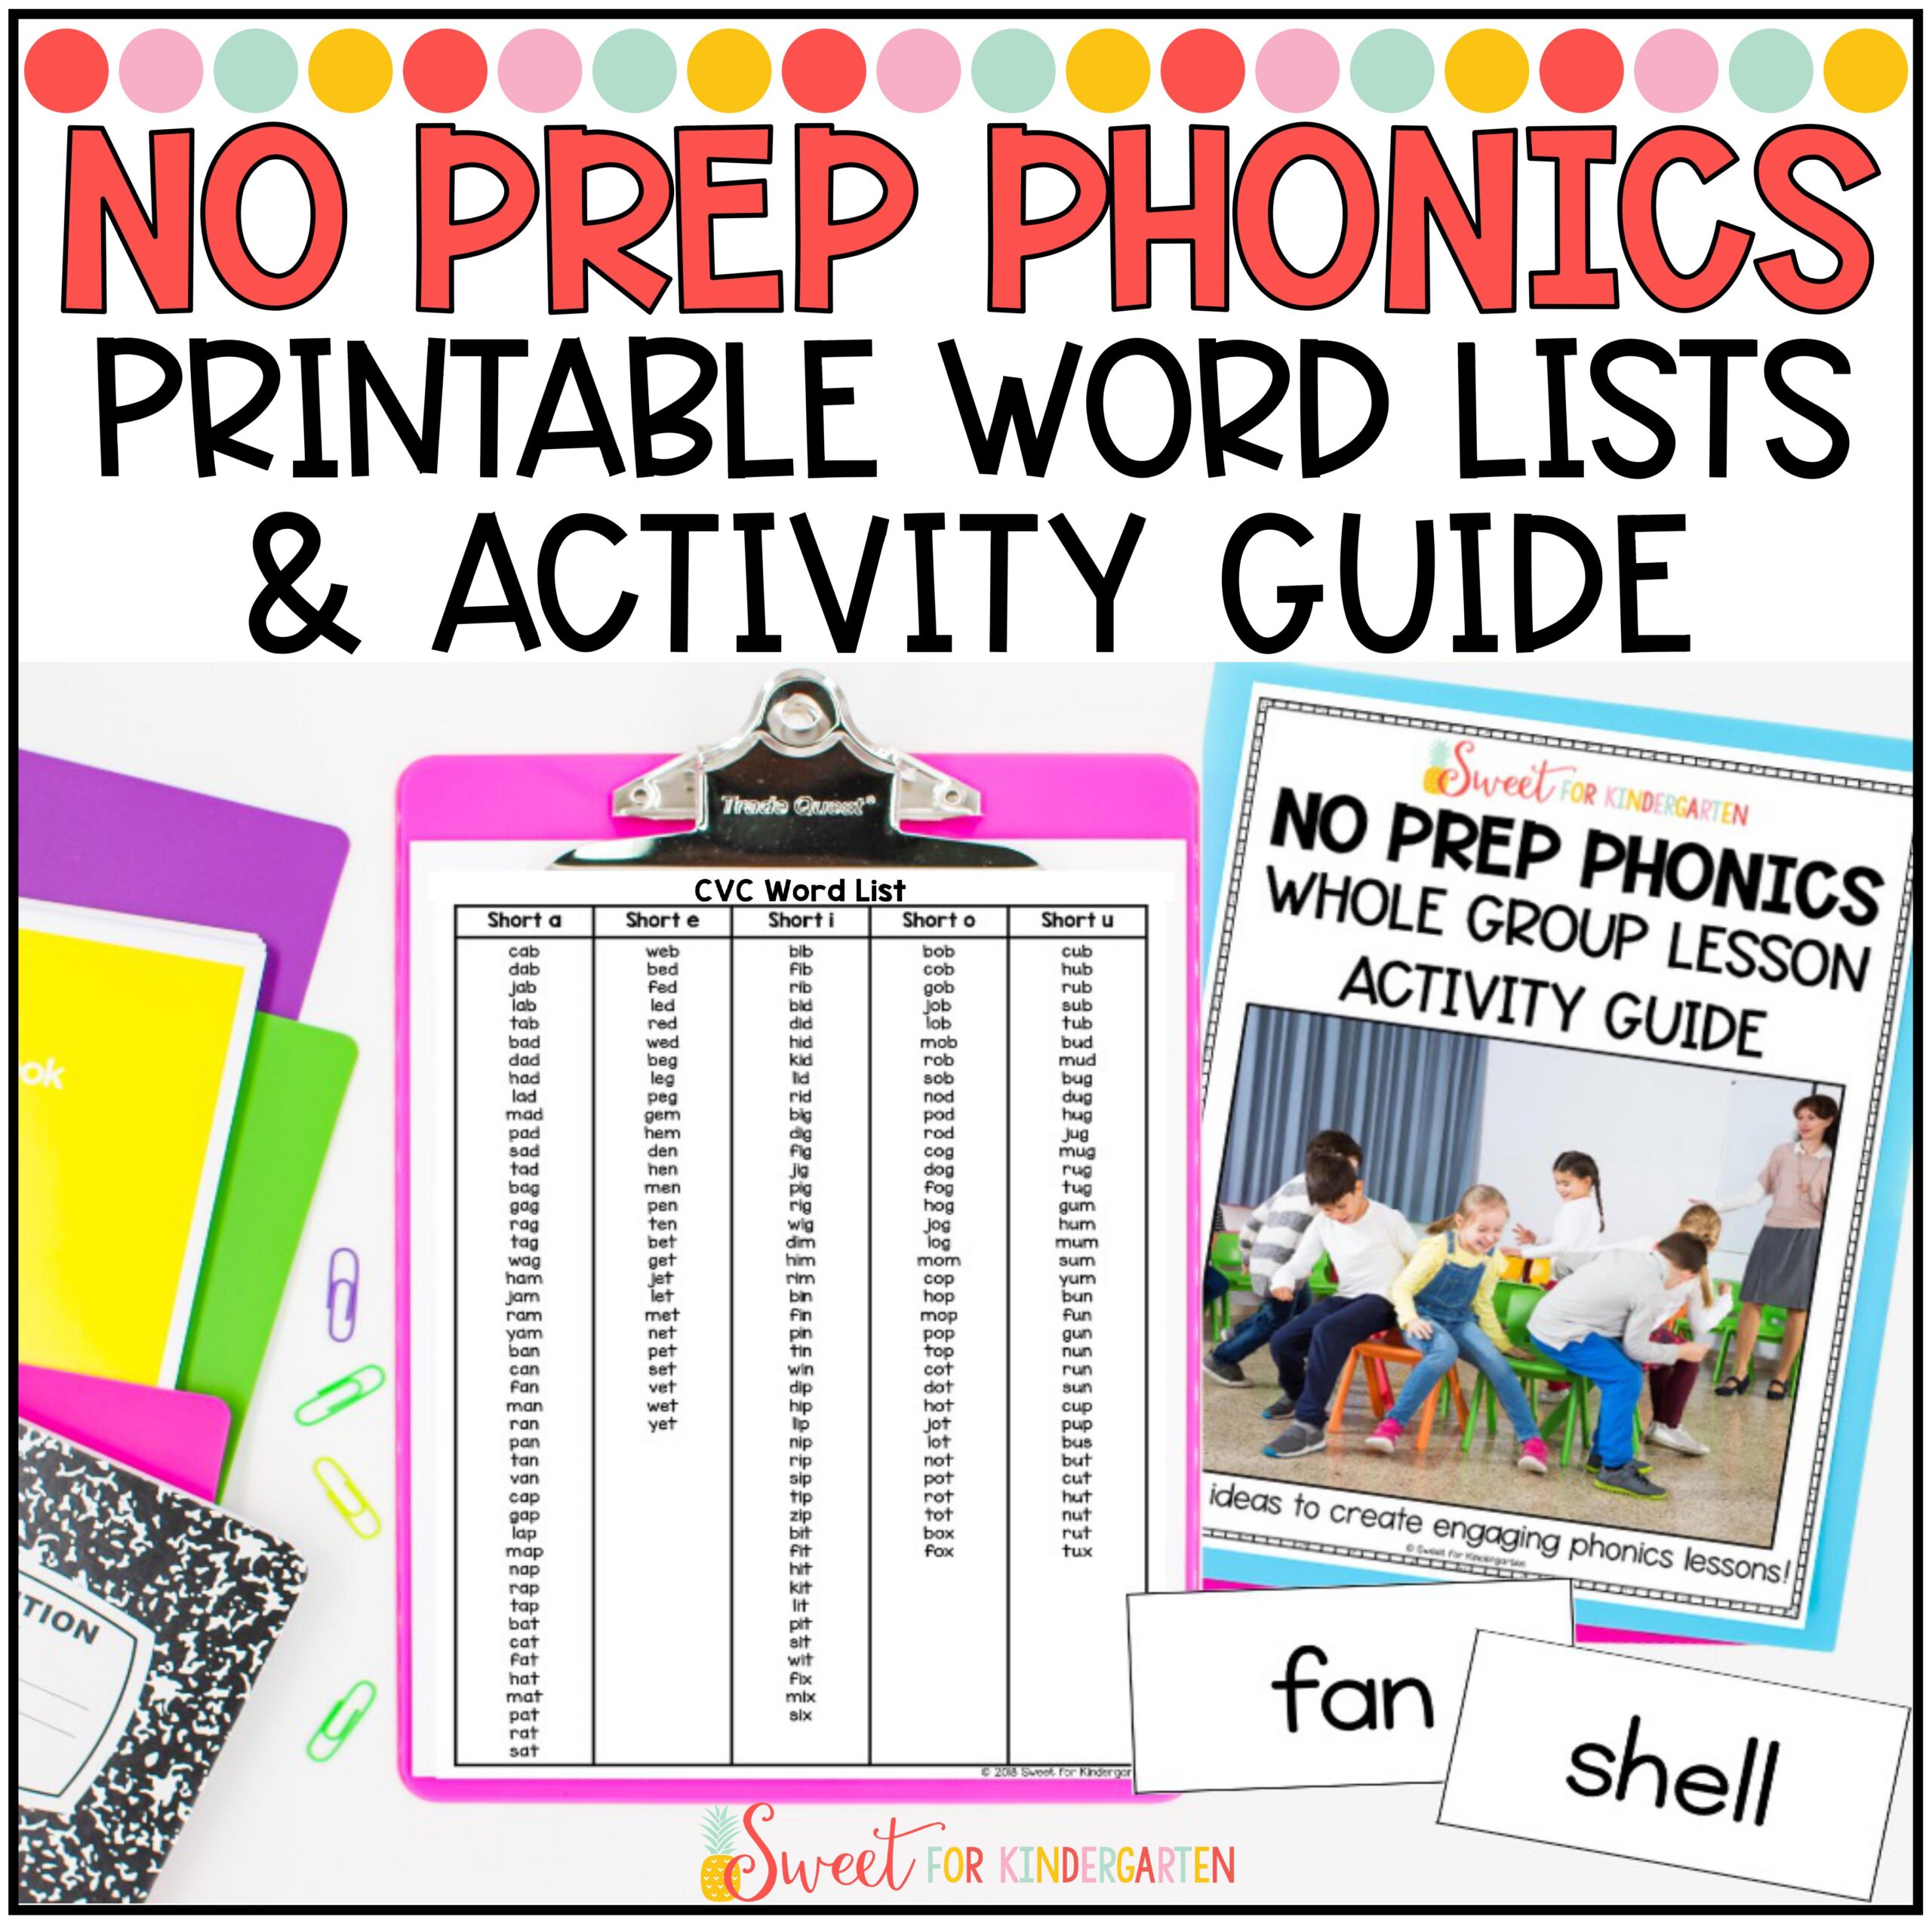 for　Sweet　Word　Phonics　Flashcards　with　Phonics　Prep　and　Multi-Sensory　Lists　Printable　Guide　Activity　No　Kindergarten